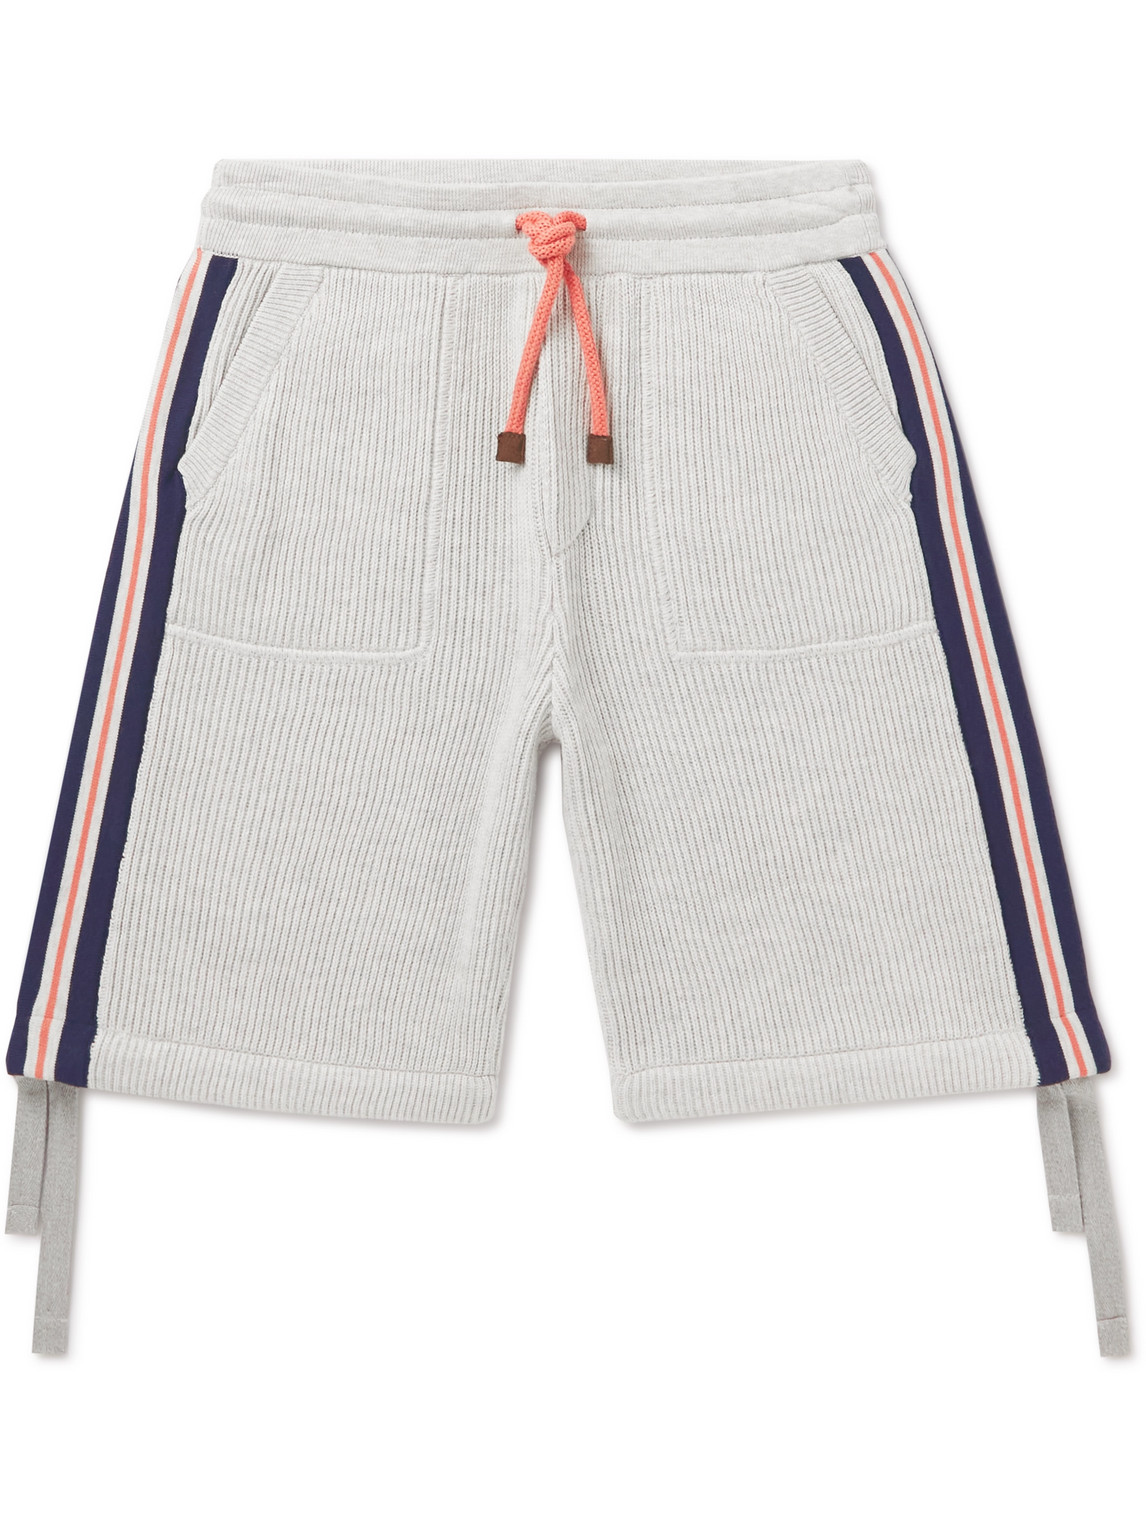 Ages 4-7 Striped Ribbed Cotton Drawstring Shorts